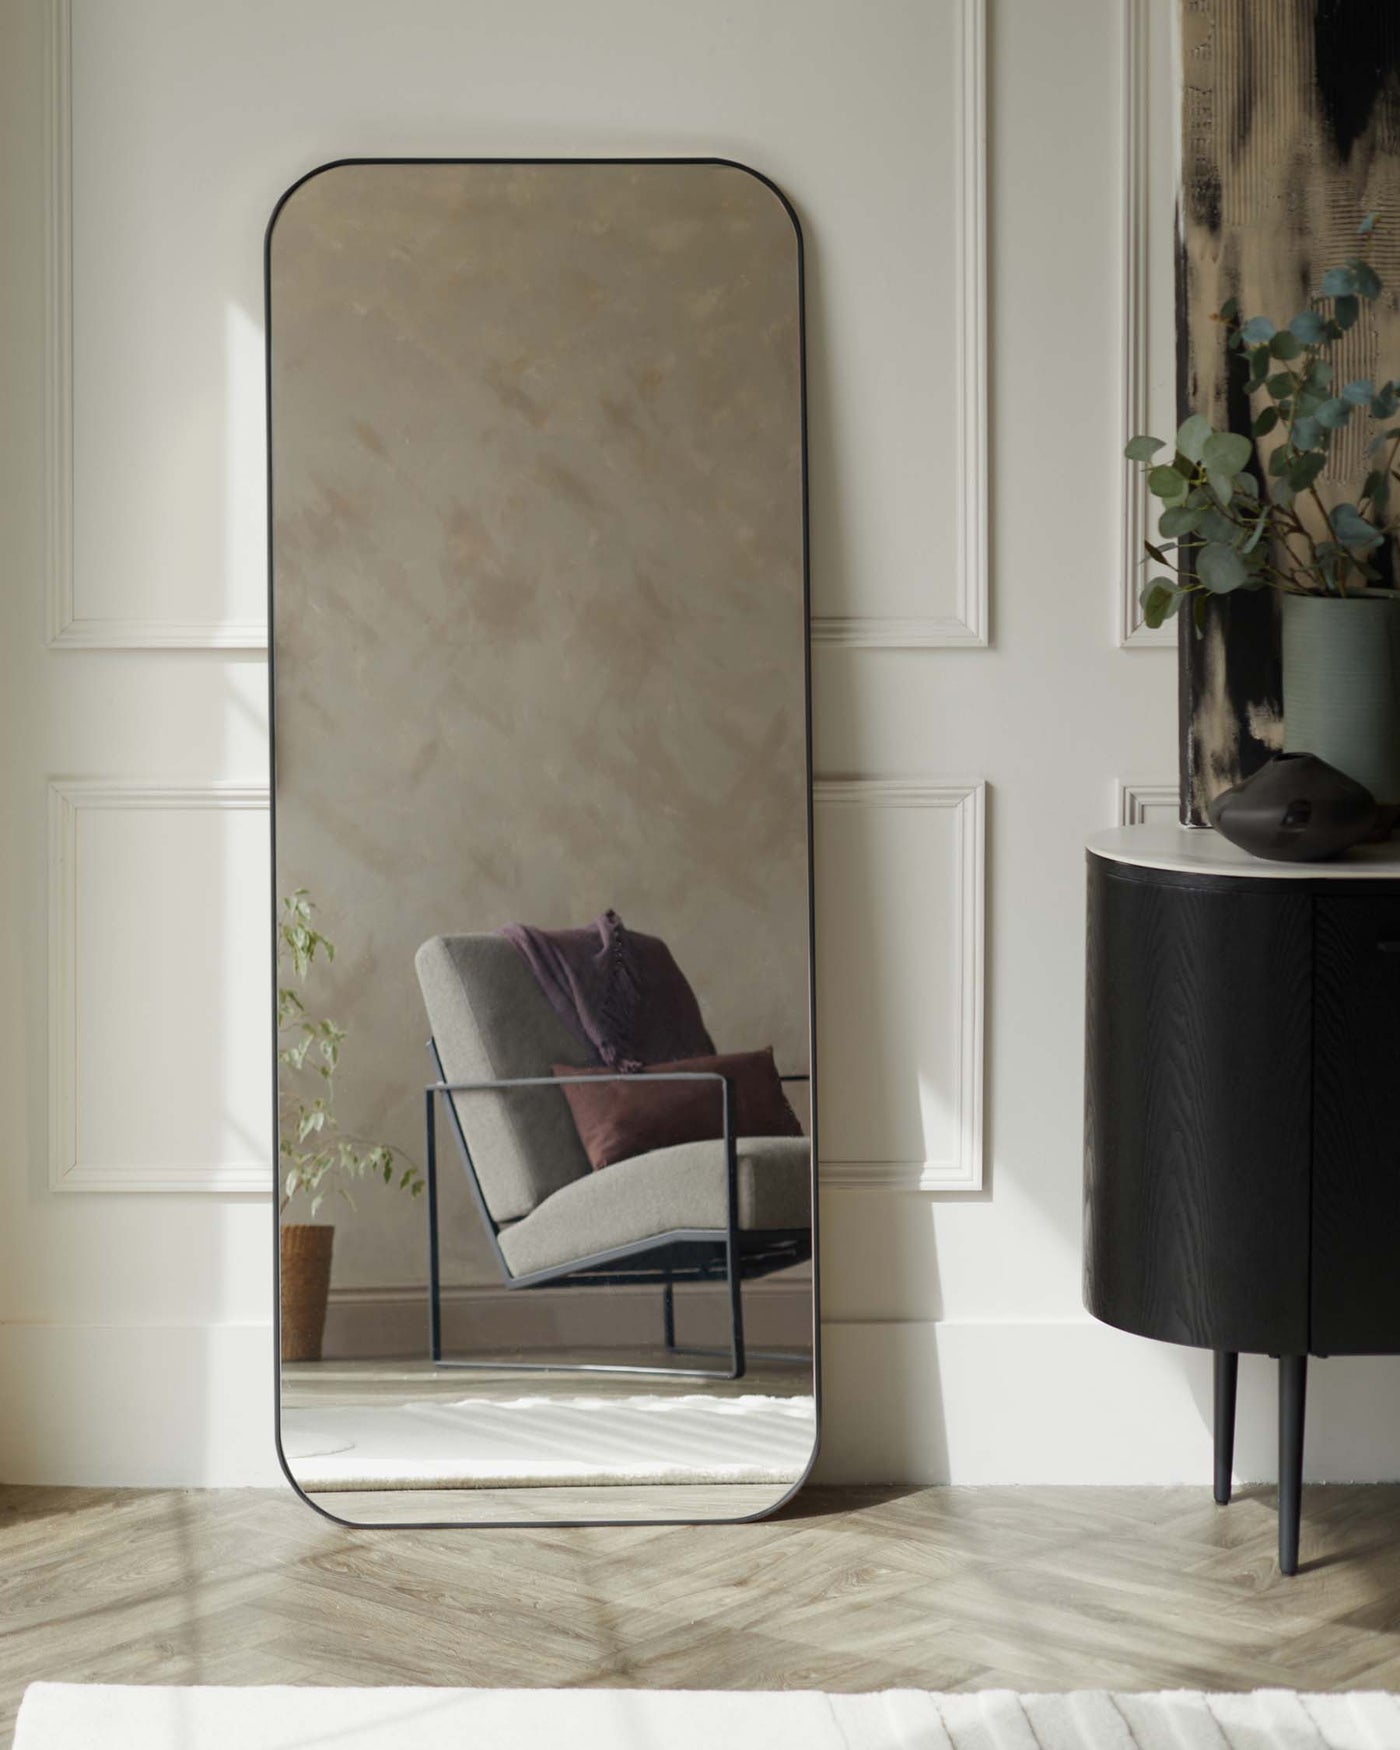 A large, rectangular floor mirror with rounded top corners and a thin black frame standing against a wall, reflecting a modern armchair with a charcoal upholstered seat and a minimalist black metal frame. Beside the mirror is a small, round, black side cabinet with slender legs and textural front panels.